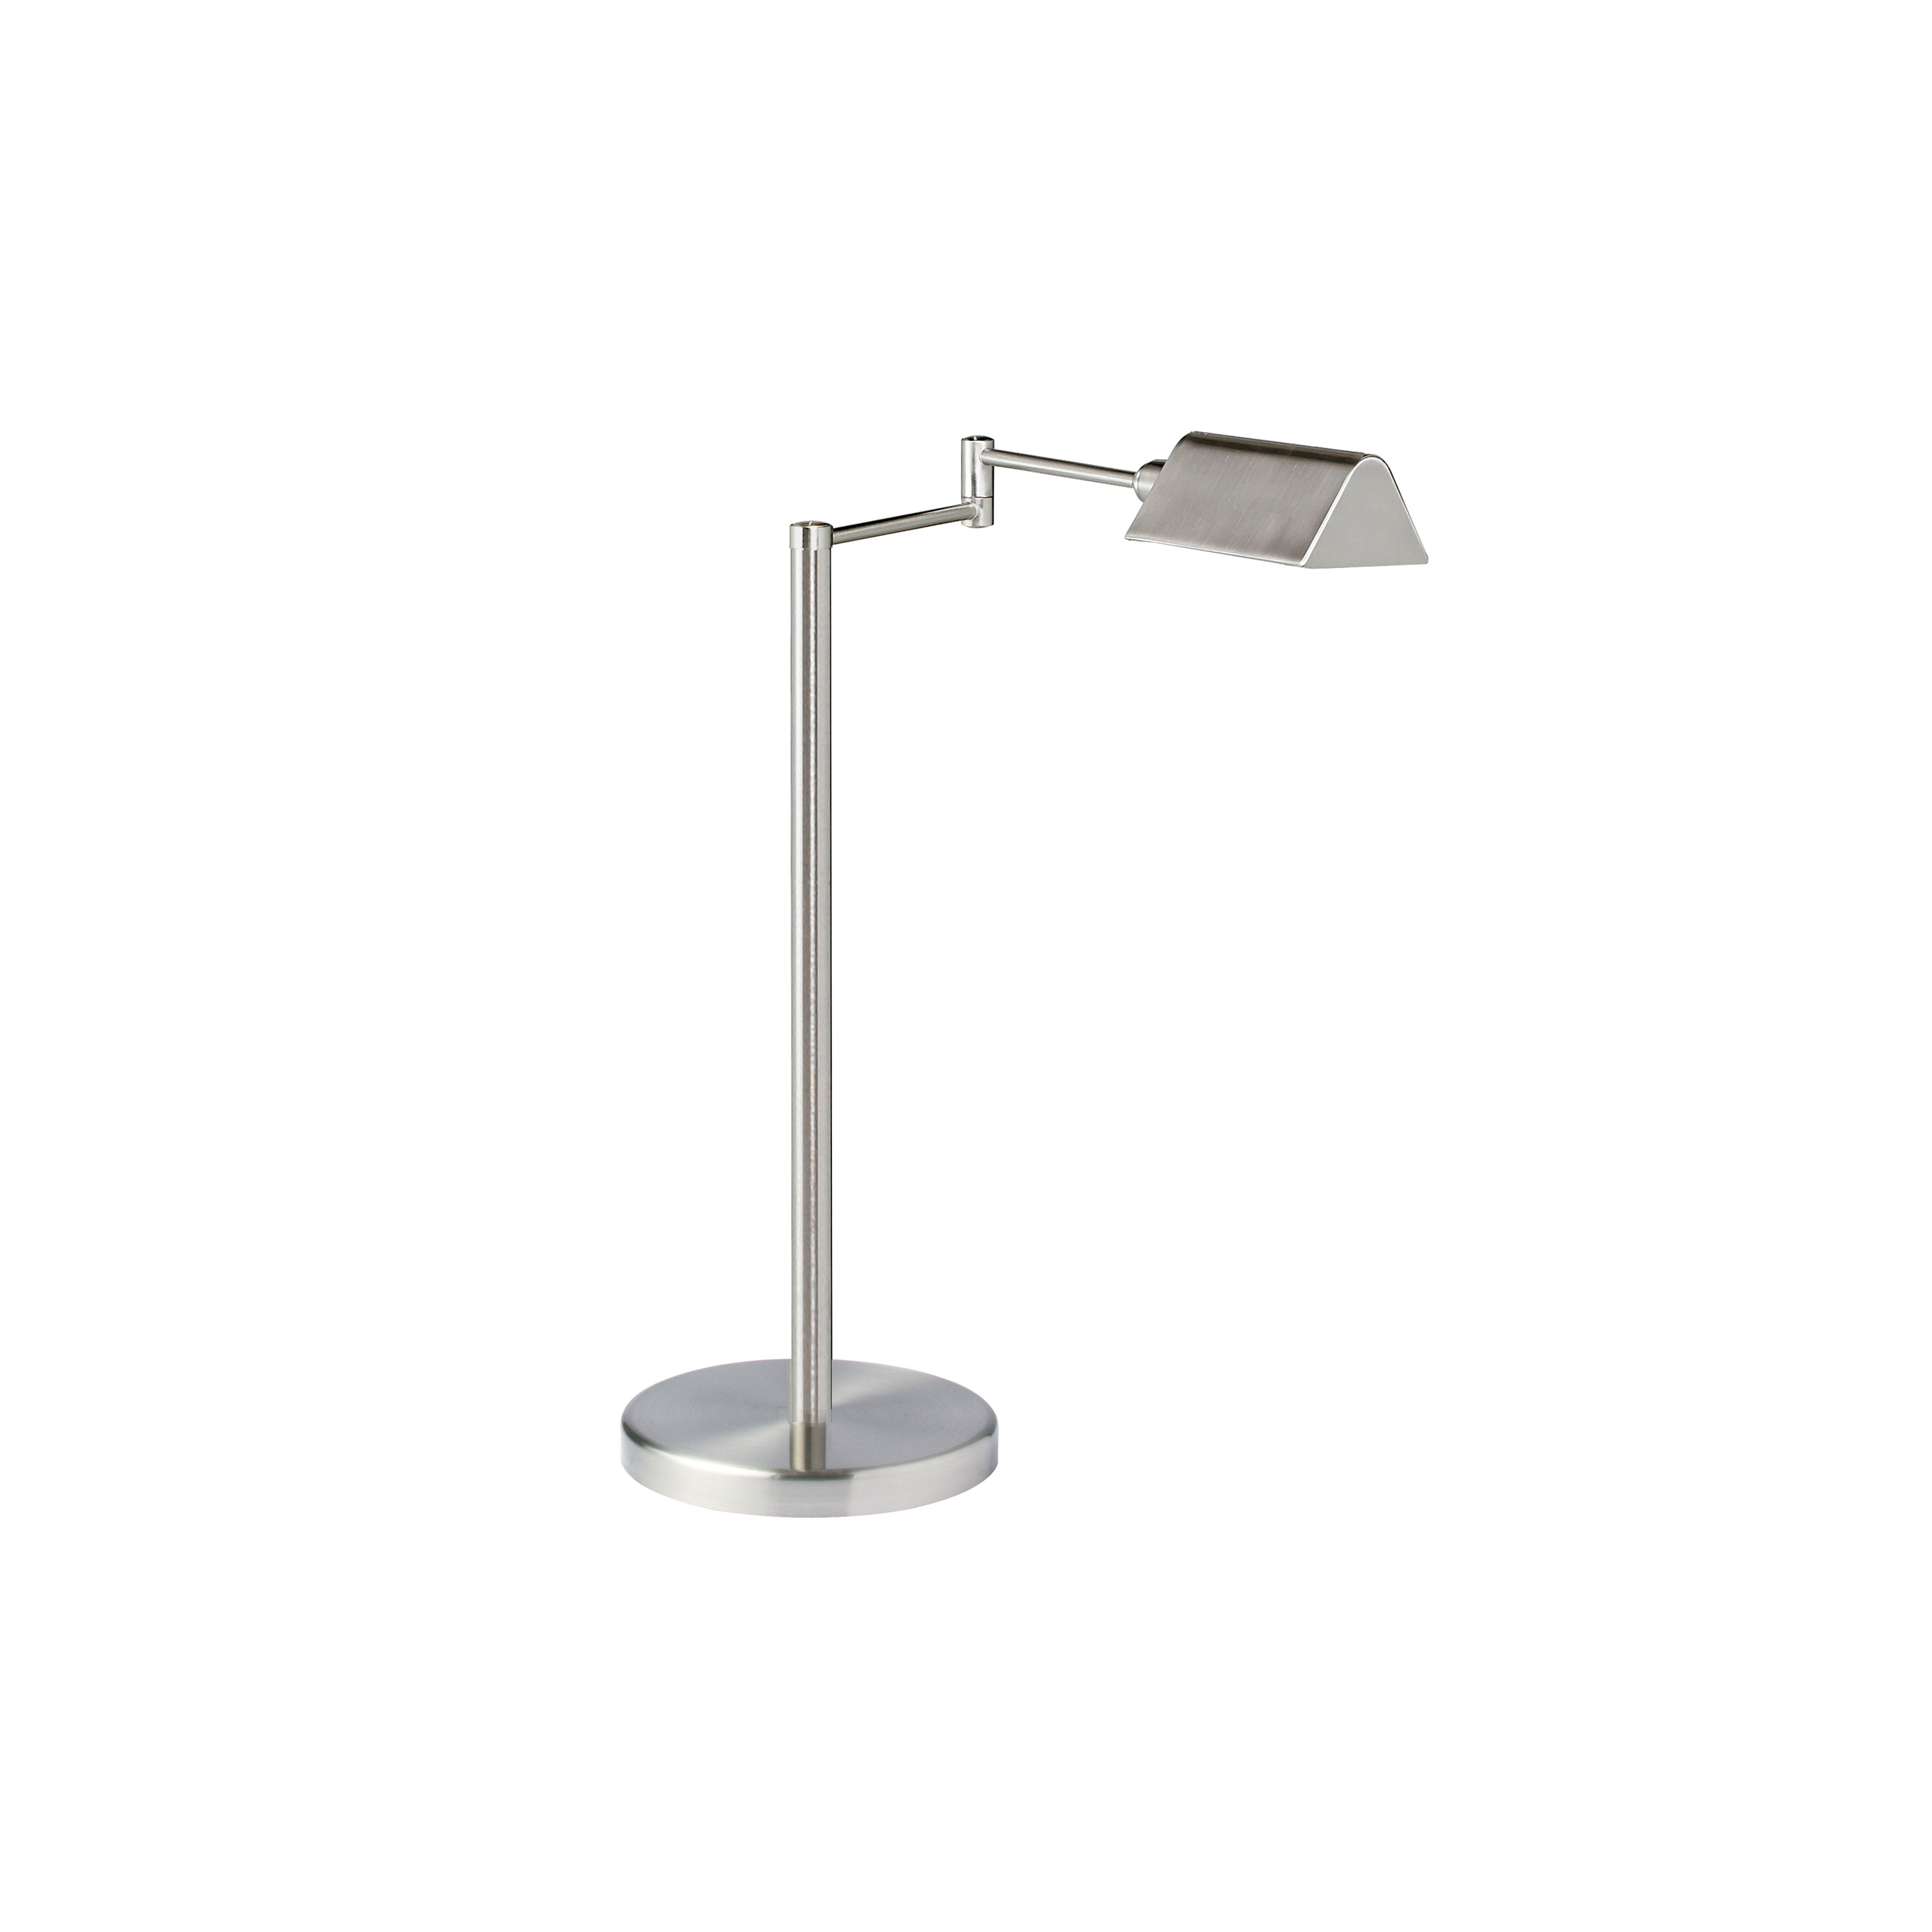 With clean lines and a stylish profile, the Adjustable LED family of portable lighting will easily adapt to your modern or minimalist décor. The design features an integrated LED light. LED fixtures produce light at up to 90 percent better efficiency than incandescent lighting.  The sleek metal frame comes in your choice of finish, and in a range of configurations to suit the needs of your space. It's an attention getting design with a very practical application. Adjustable LED lighting, with its convenient and versatile range of formats, will add both style and directional illumination to living rooms, bedrooms and office spaces.